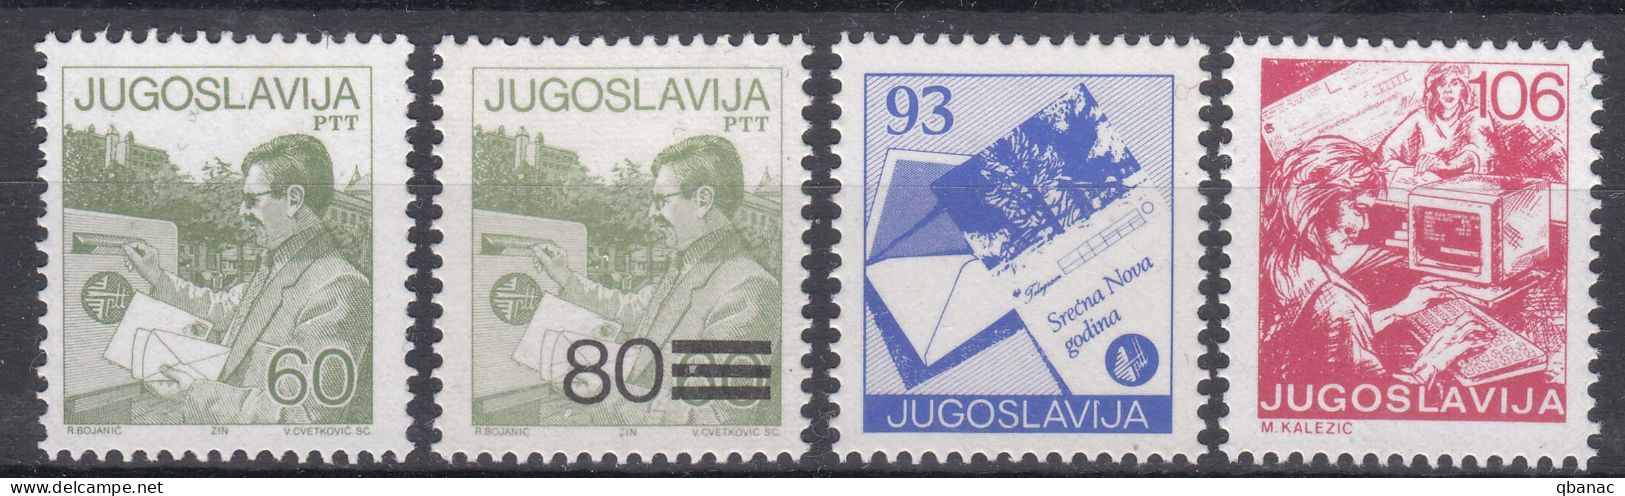 Yugoslavia Republic 1987 Definitive Stamps, Mint Never Hinged - Neufs